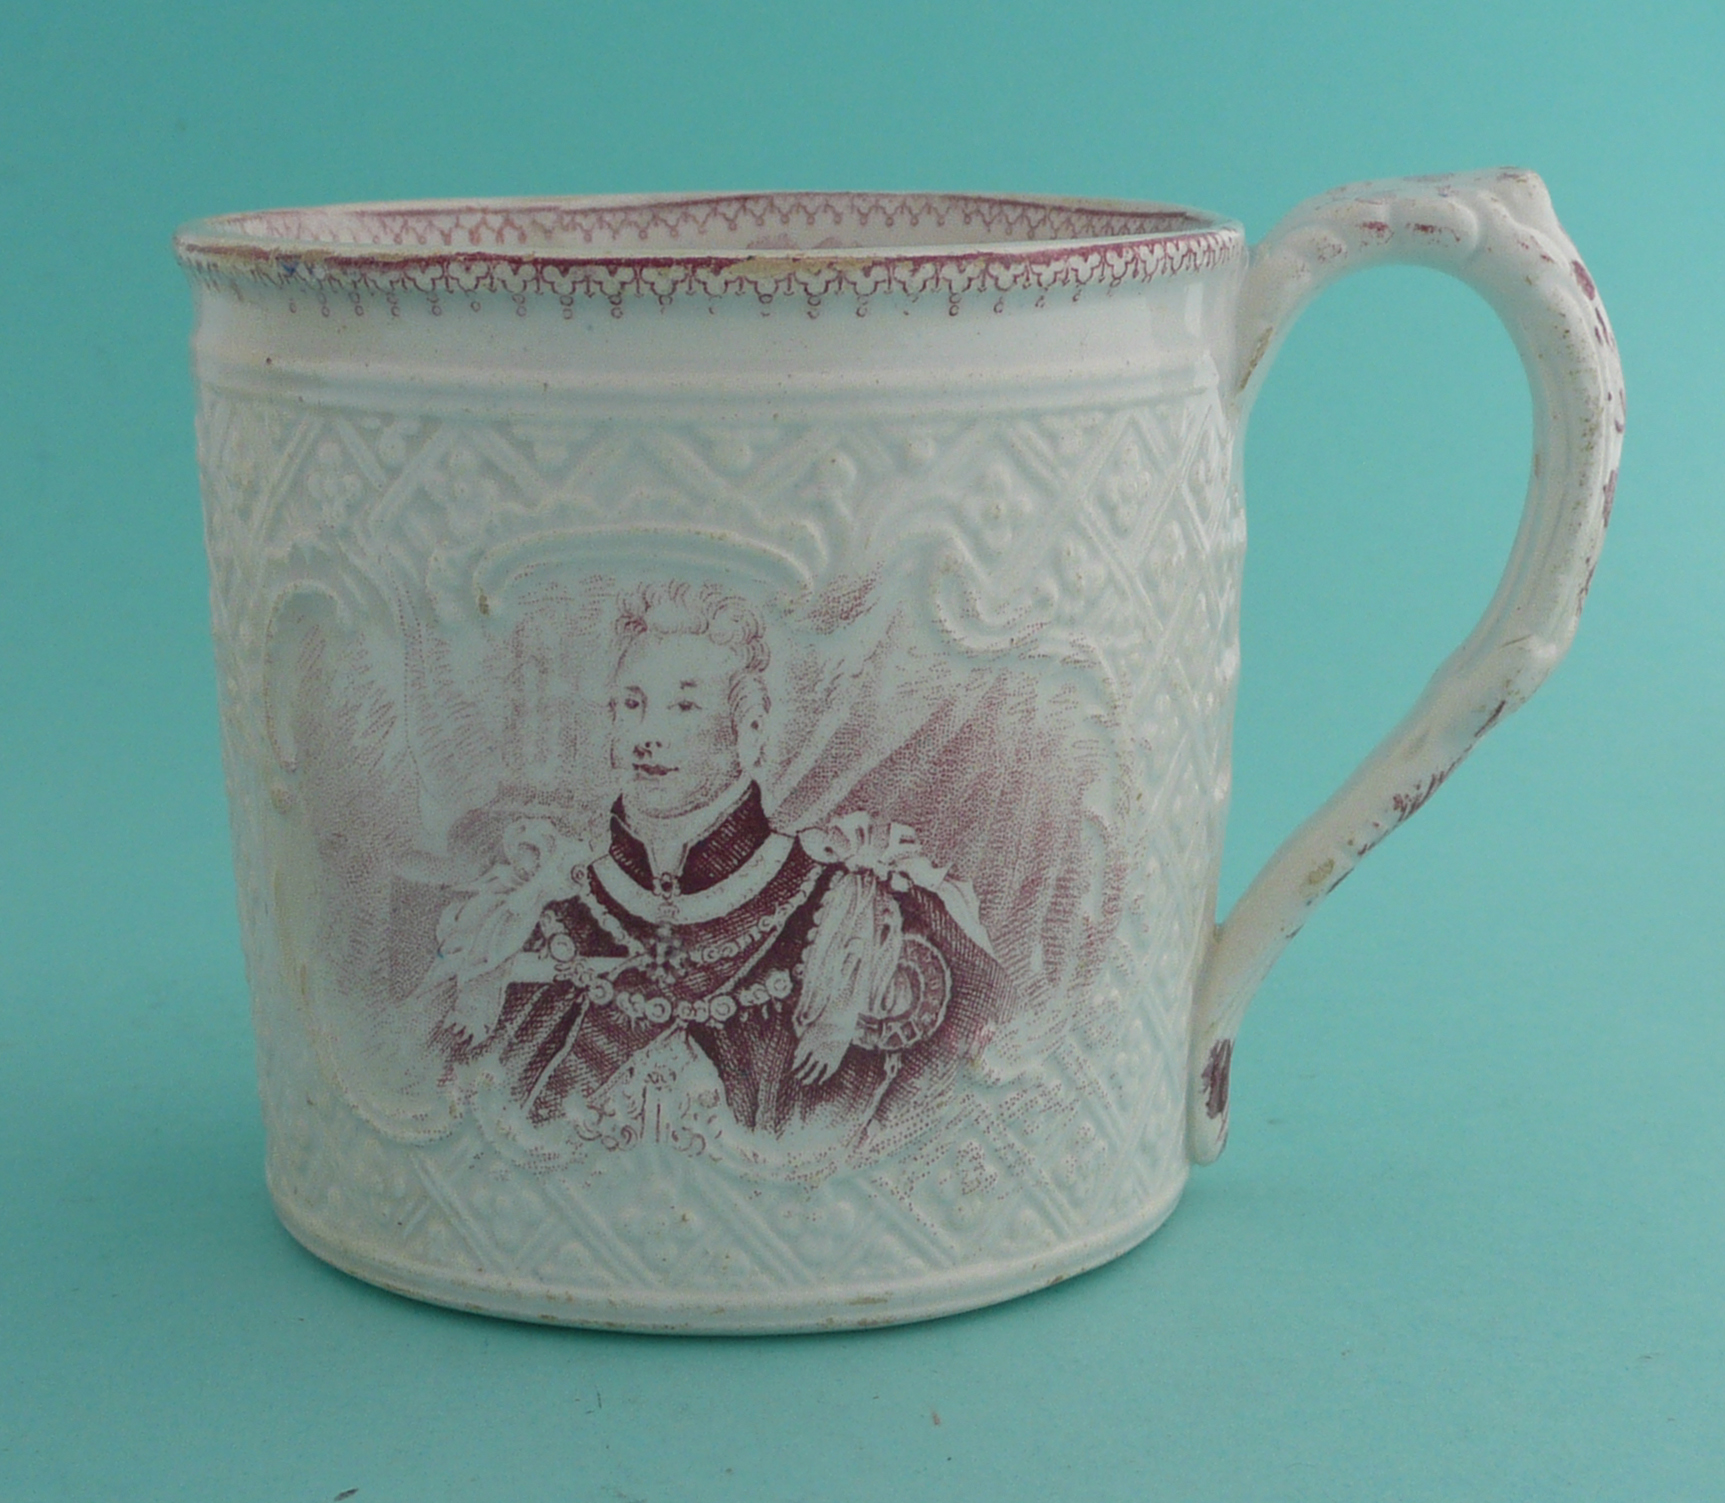 1831 Coronation: a mug moulded with a lozenge design printed in pink with portraits, 85mm. (